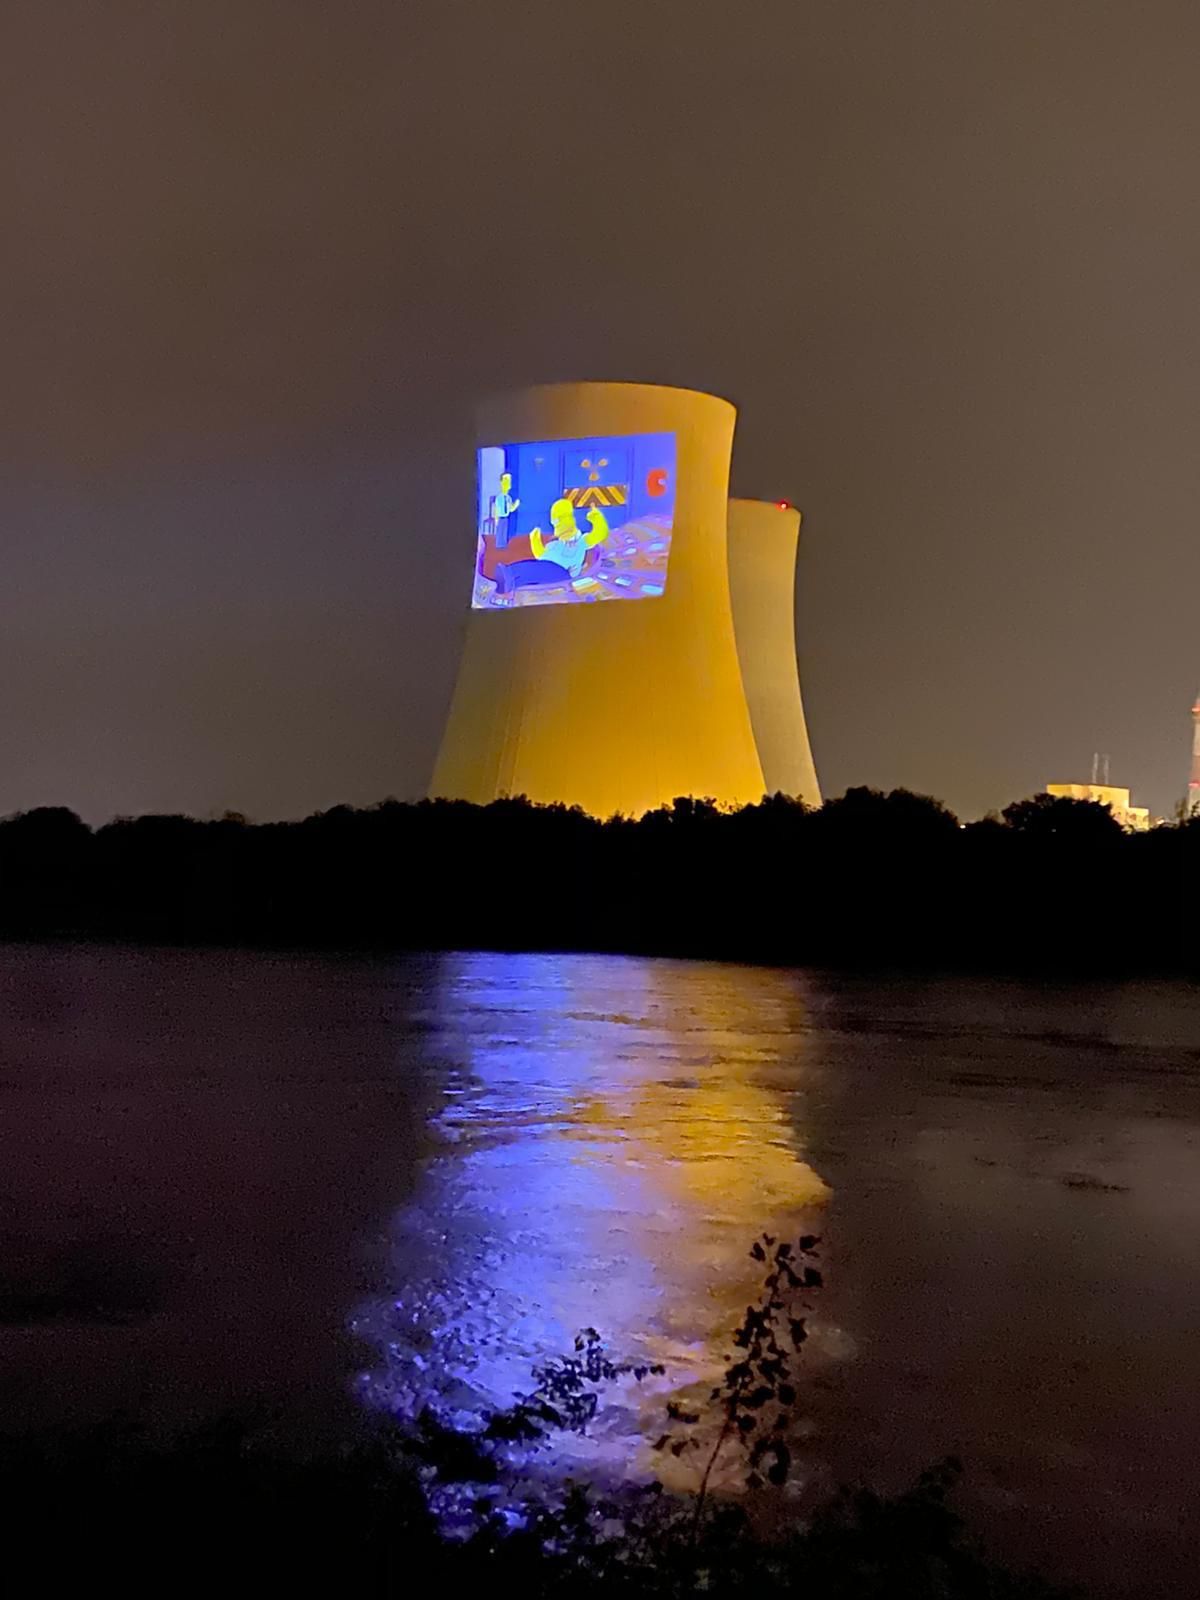 This morning the two cooling towers of our nearby nuclear power plant were detonated by the operator. The night before Greenpeace had their share of fun with a laser.